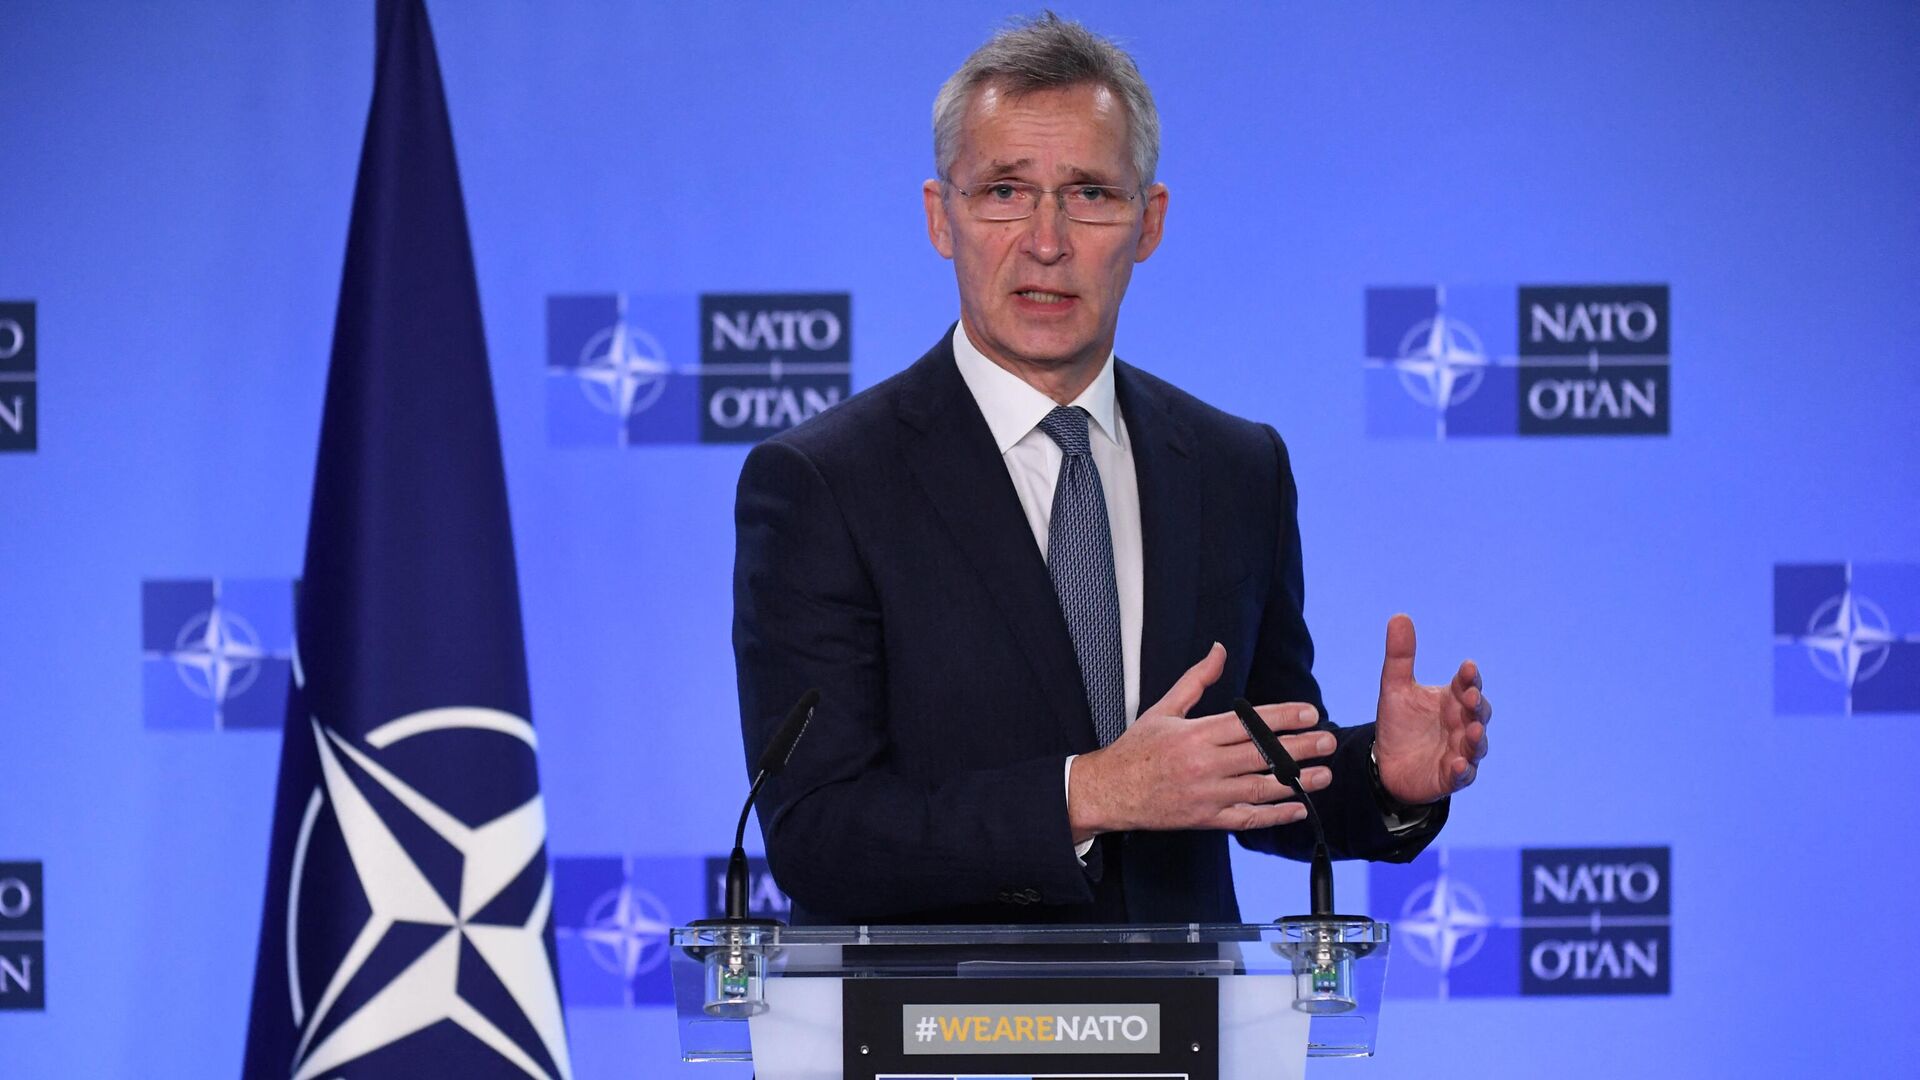 NATO Secretary General Jens Stoltenberg gestures as he speaks during a joint press conference with Ukraine's Deputy Prime Minister for European and Euro-Atlantic Integration after their bilateral meeting at the NATO headquarters in Brussels on January 10, 2022.  - Sputnik International, 1920, 24.08.2022